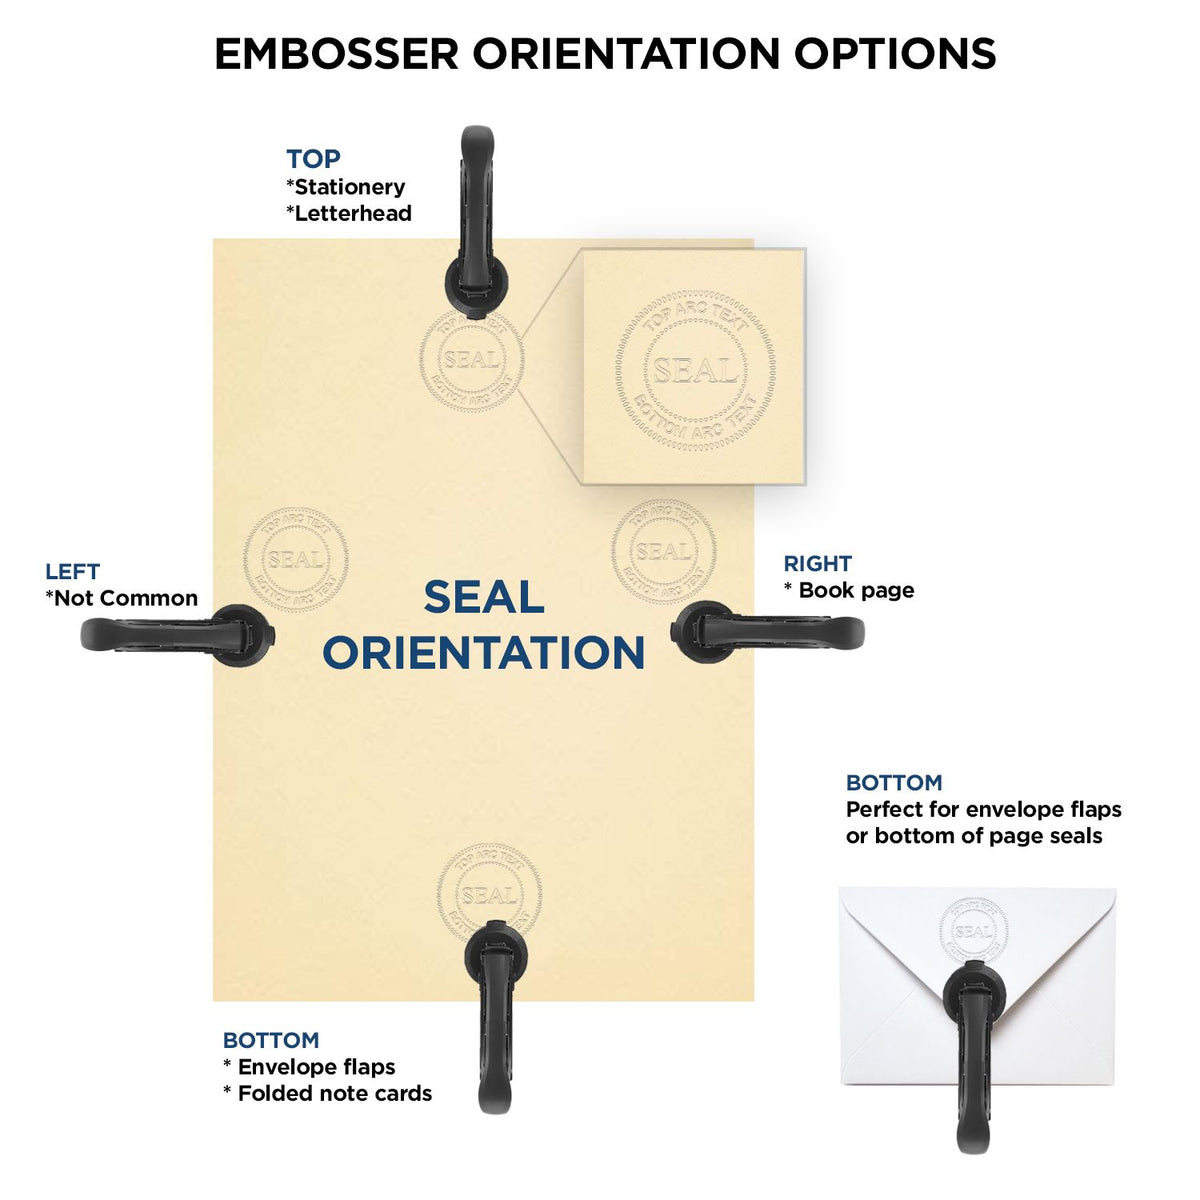 An infographic for the Gift Delaware Engineer Seal showing embosser orientation, this is showing examples of a top, bottom, right and left insert.